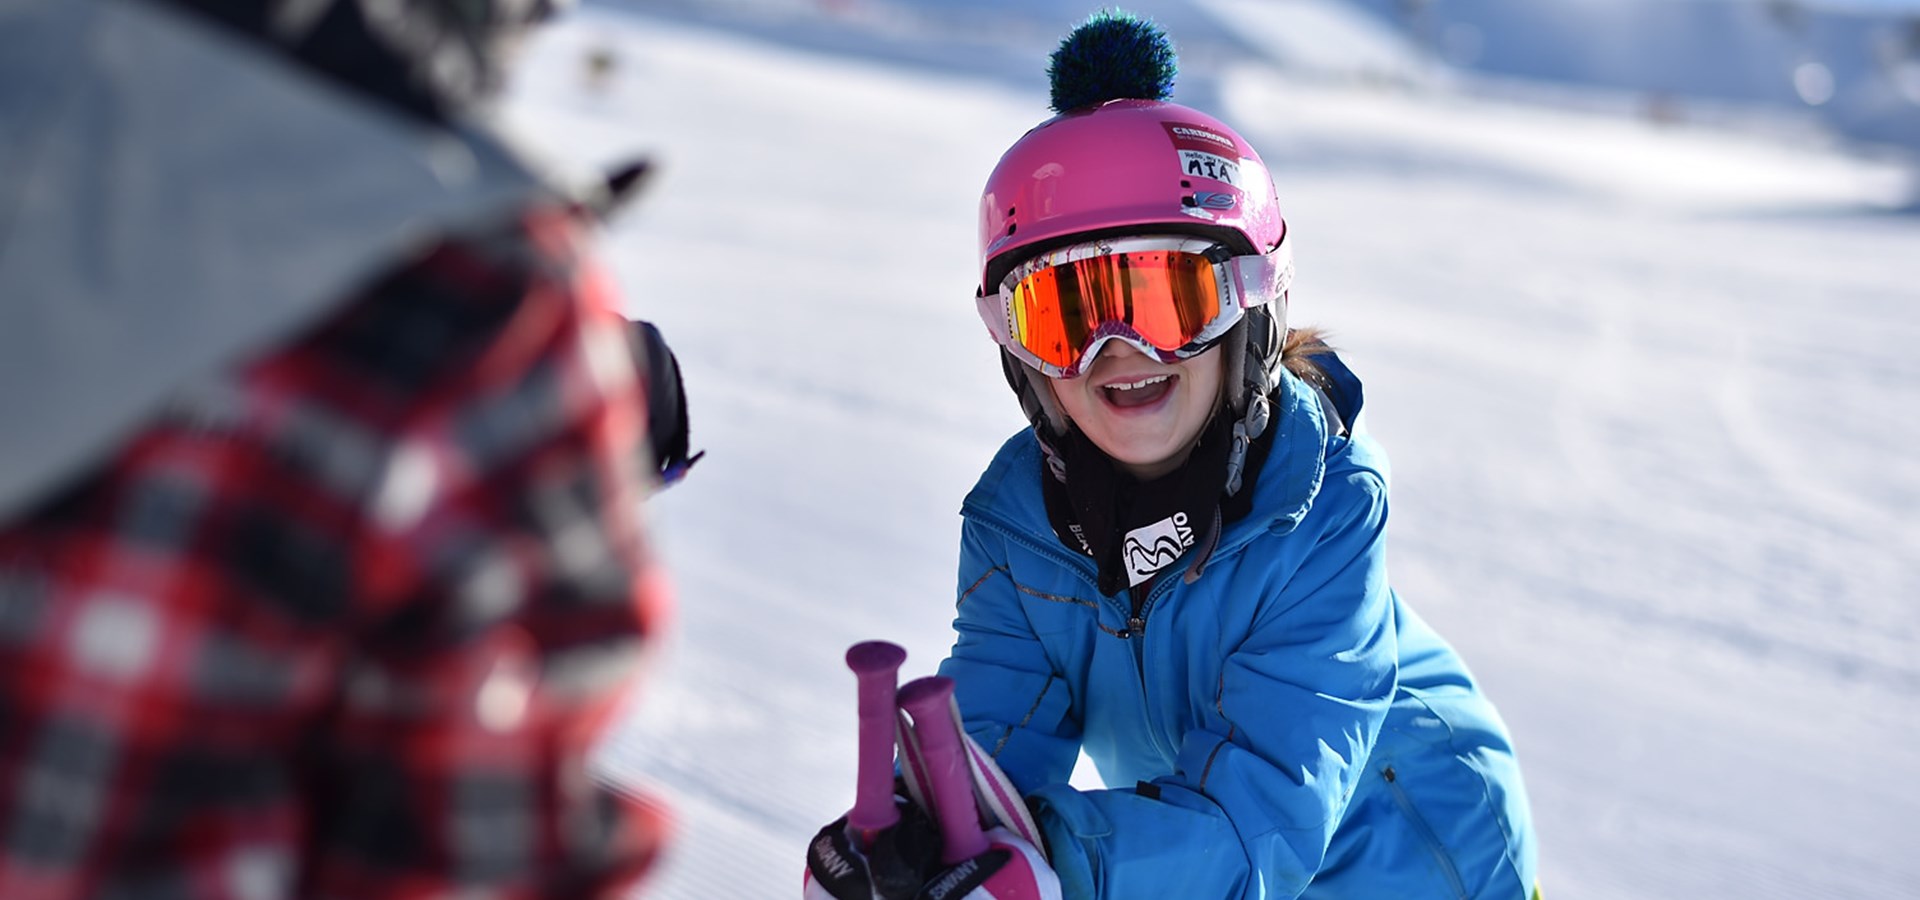 cardrona-local-kids-programmes-header-local kids ski lessons-local kids snowboard lessons